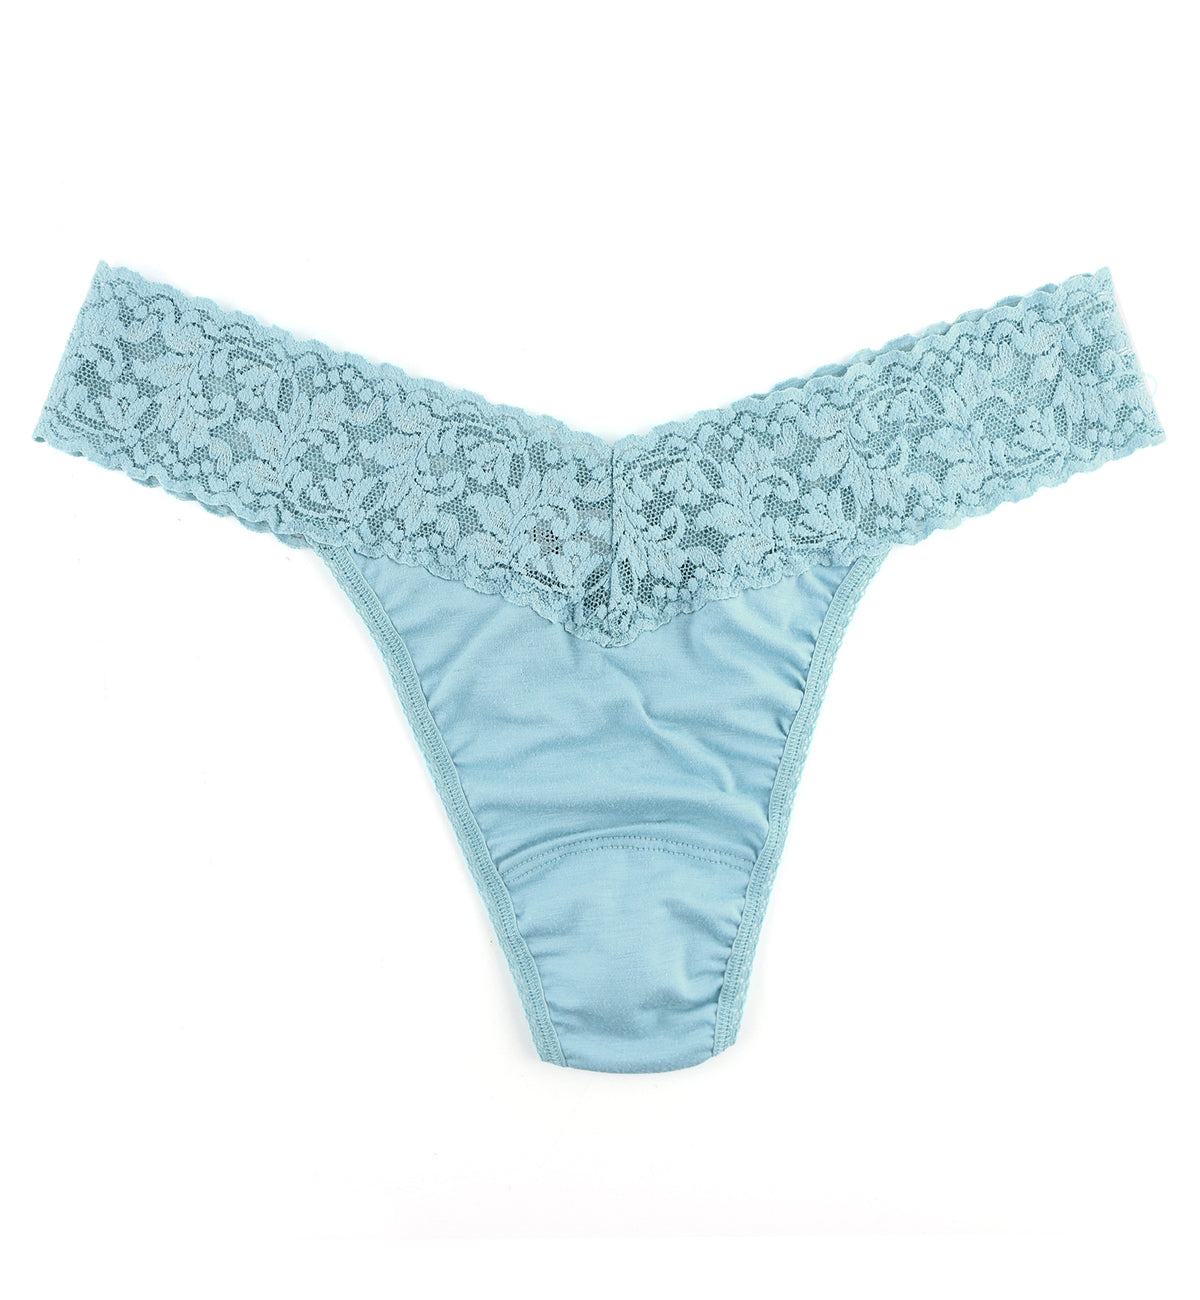 Hanky Panky Cotton Original Rise Thong (891801P),Butterfly Blue - Butterfly Blue,One Size